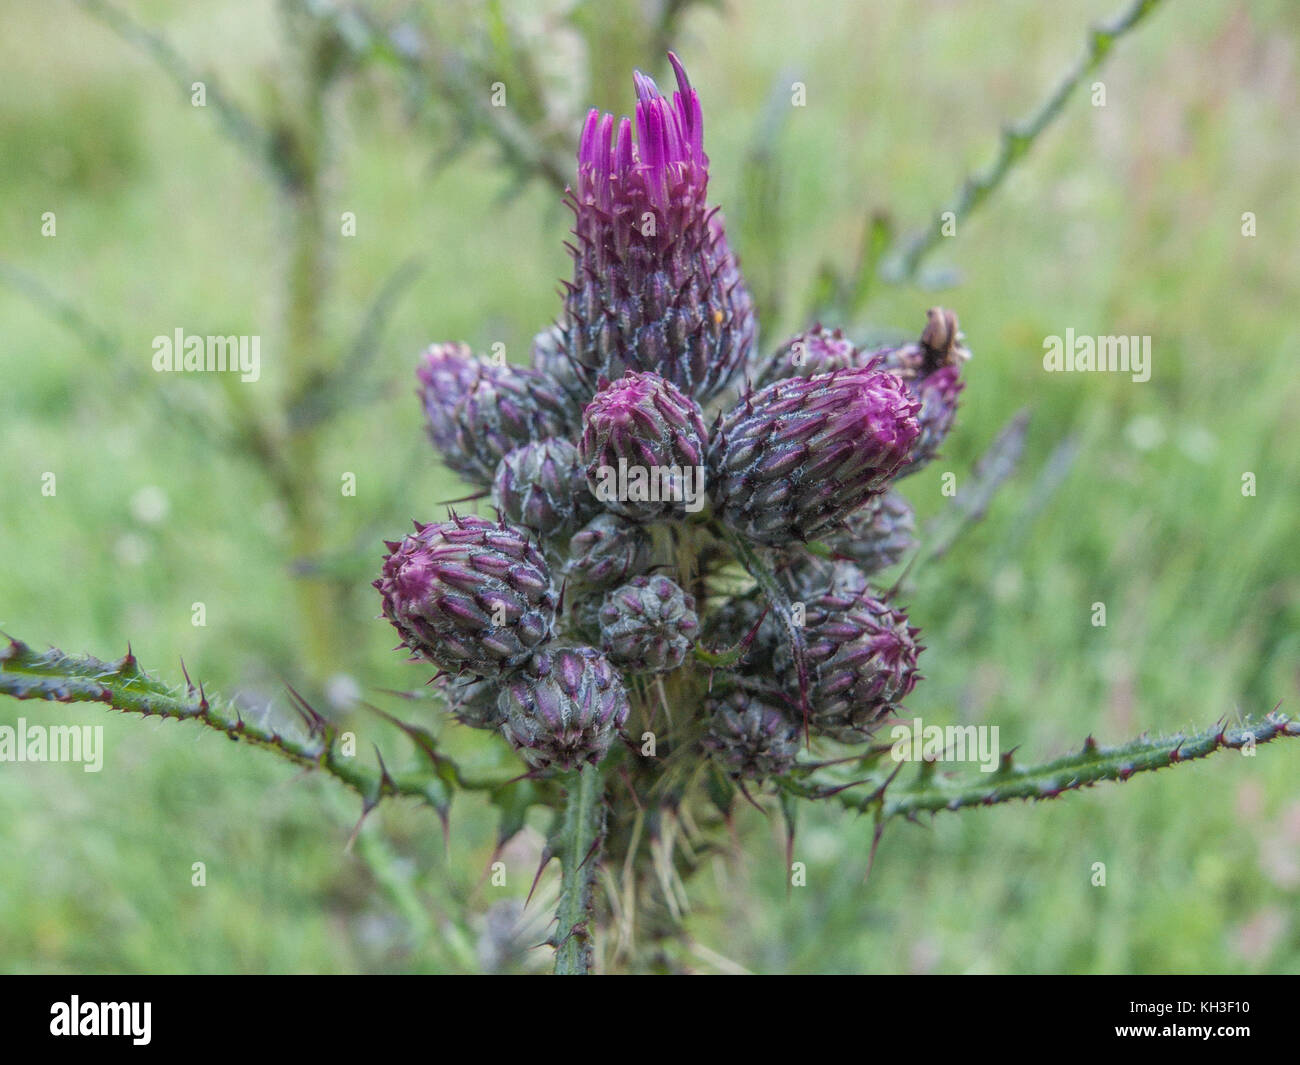 Flower buds of Marsh Thistle / Cirsium palustre - the prepared stems of which are edible when cooked. Possible metaphor for pain / painful / sharp. Stock Photo